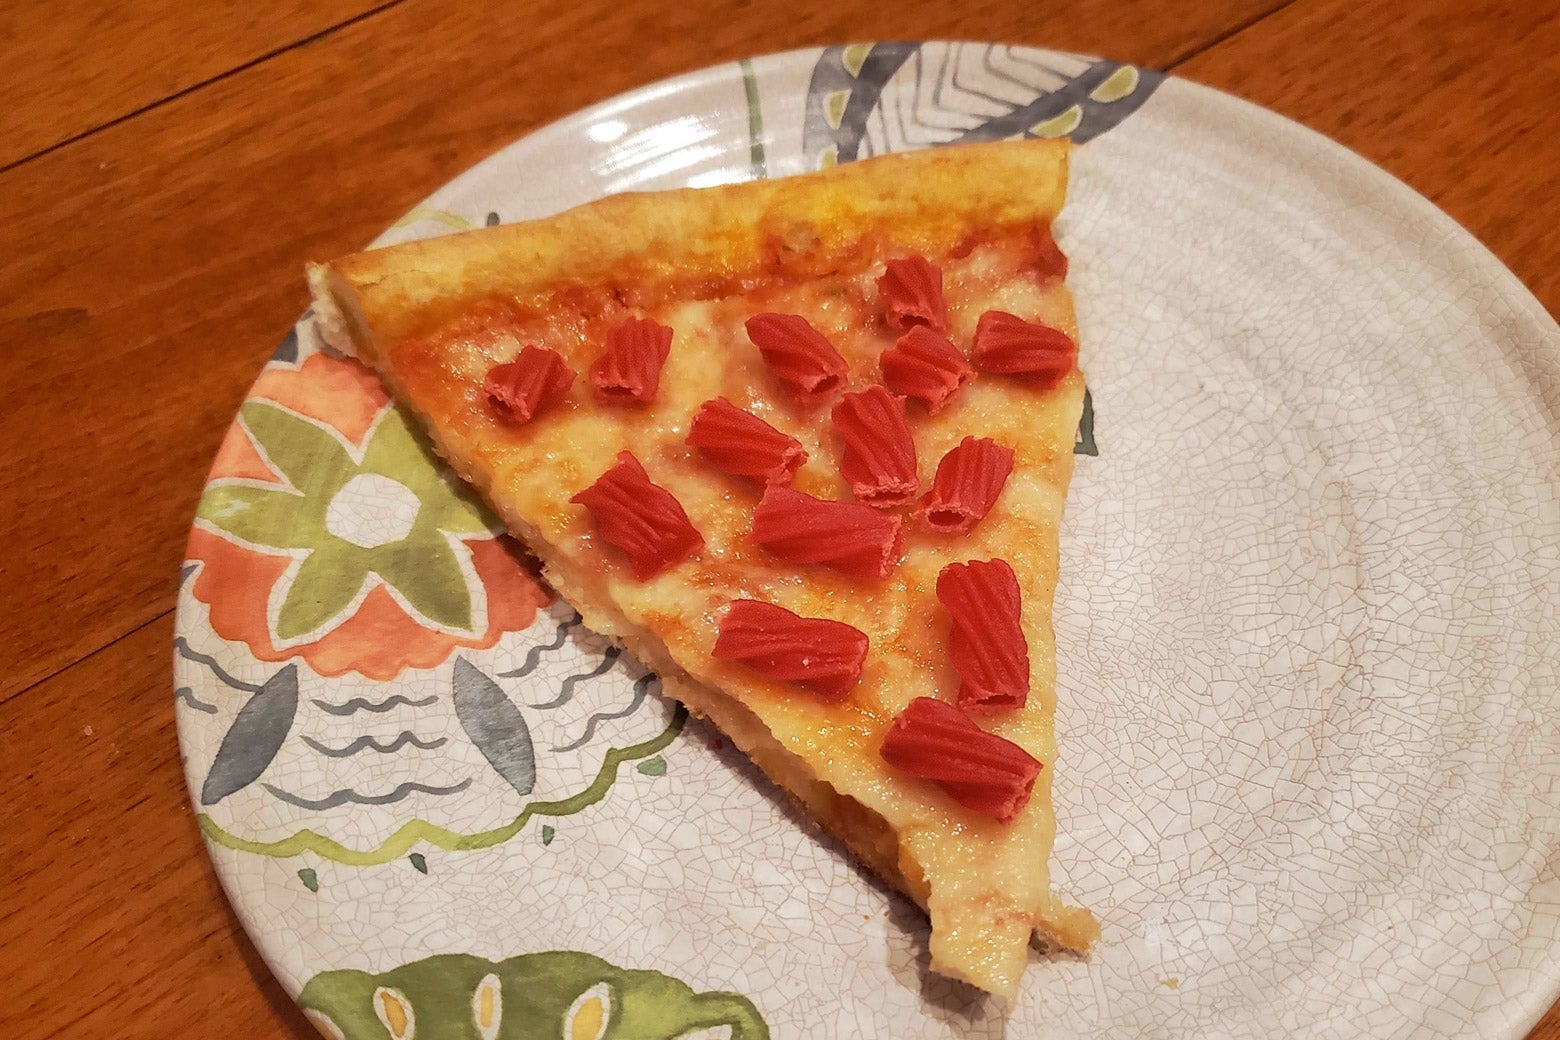 A slice of cheese pizza with longer slices of red licorice on it.